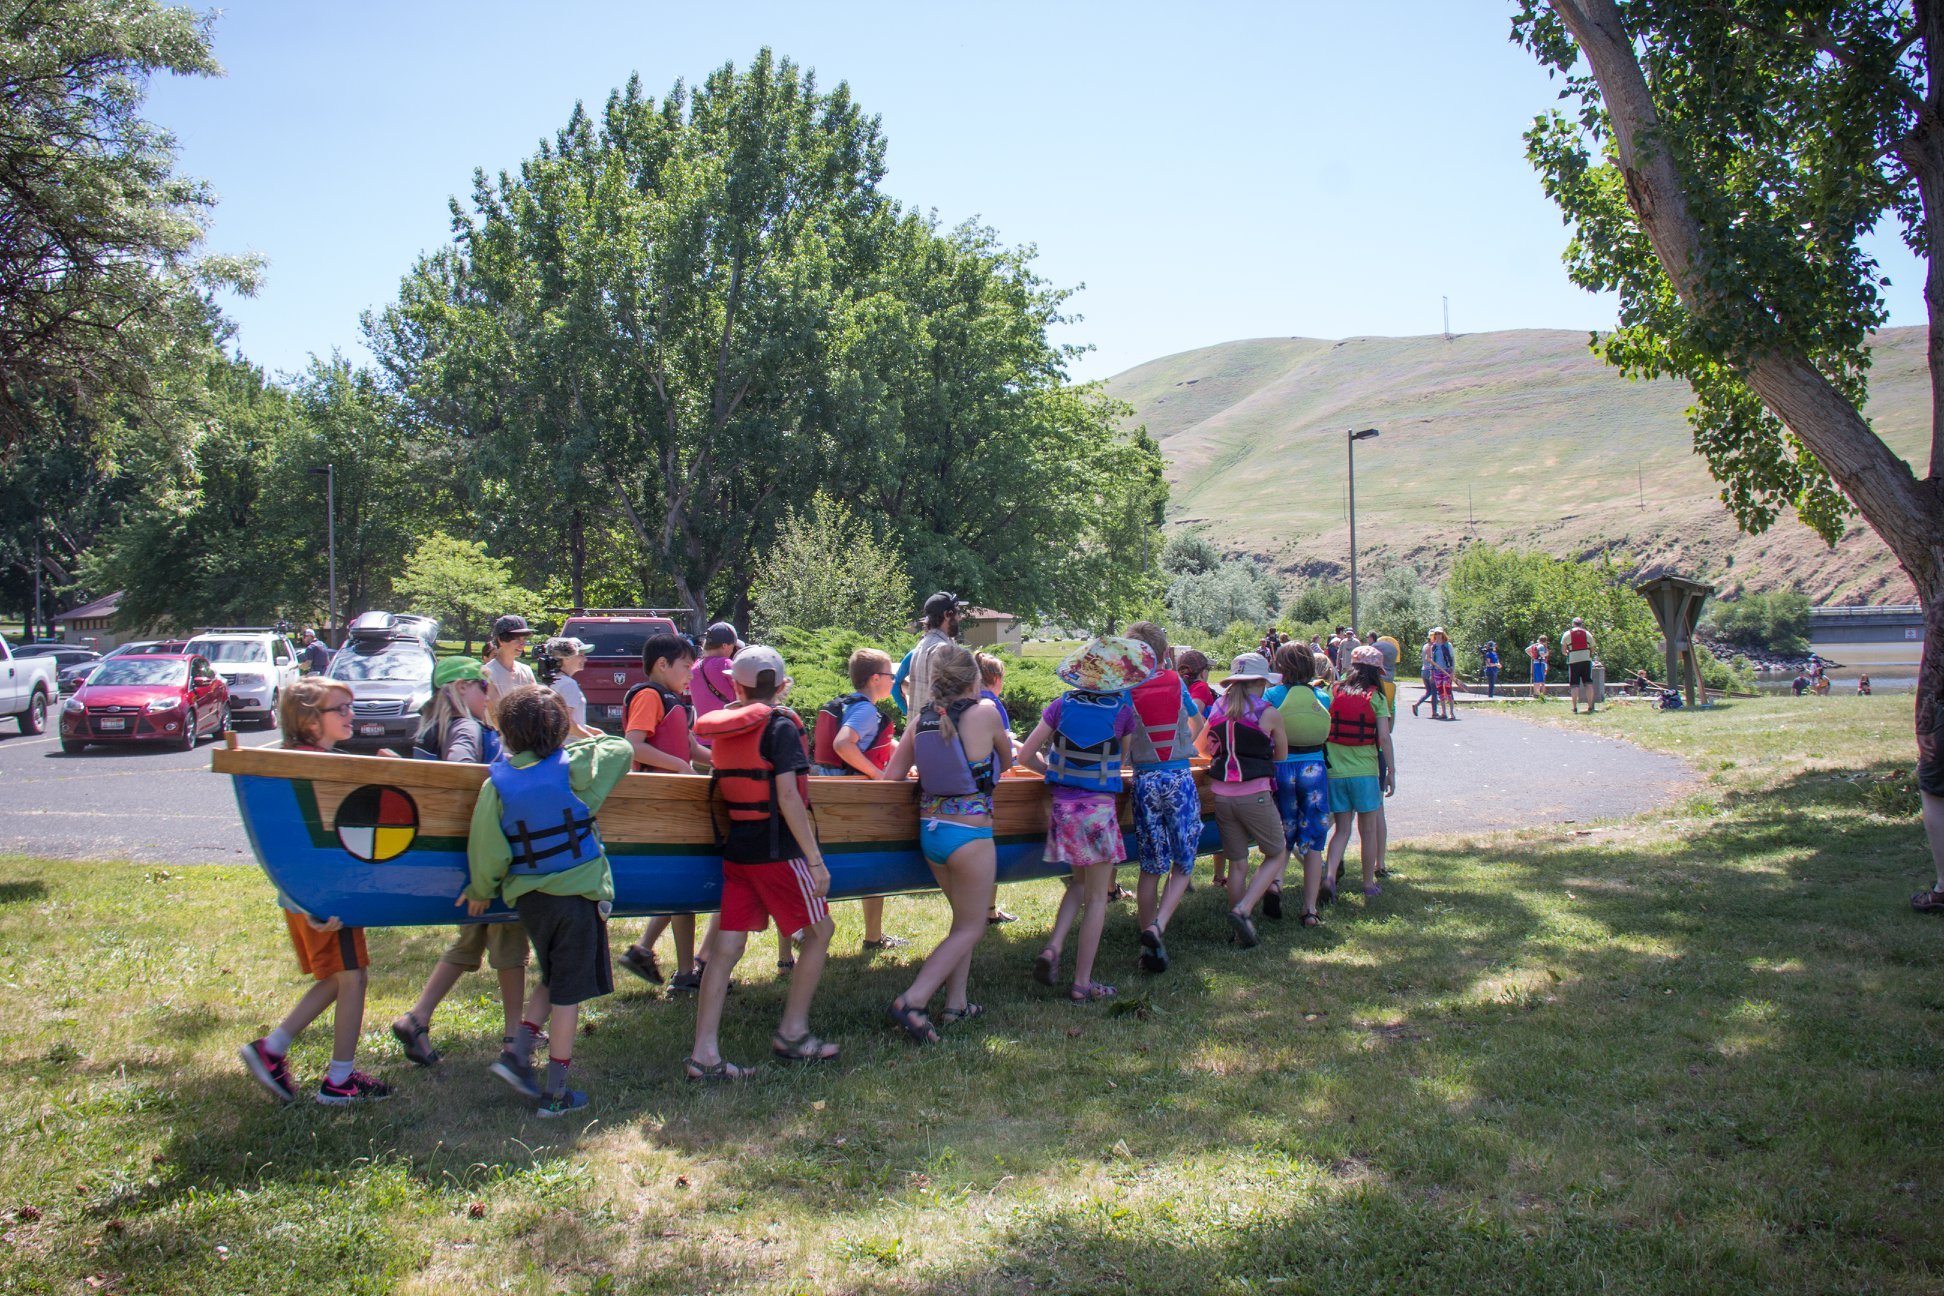  Palouse Prairie Charter School Canoe Project “Maiden Voyage - Blooming Culture” 